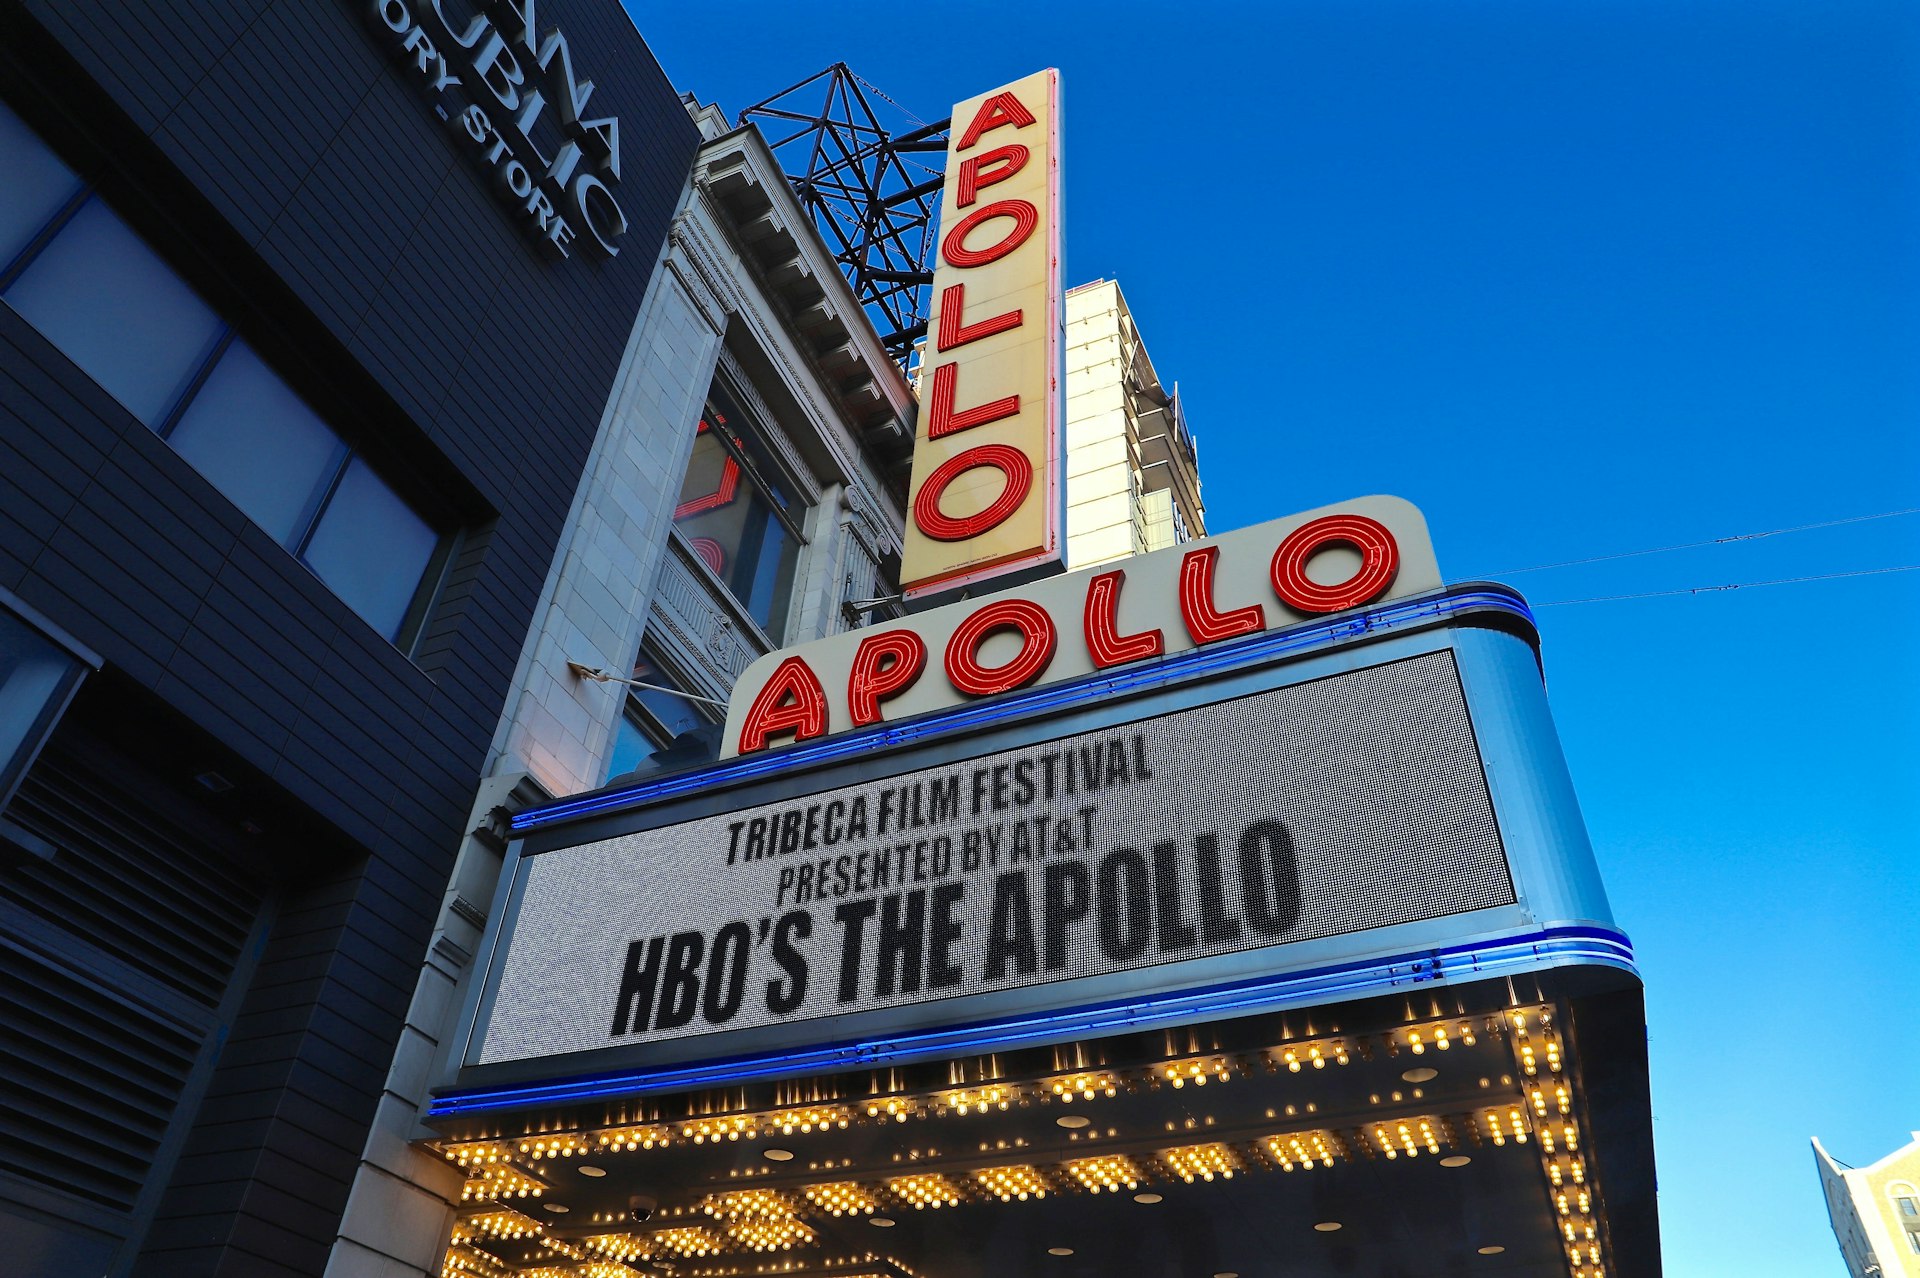 The marquee and neon sign at the Apollo Theater in Harlem, Manhattan